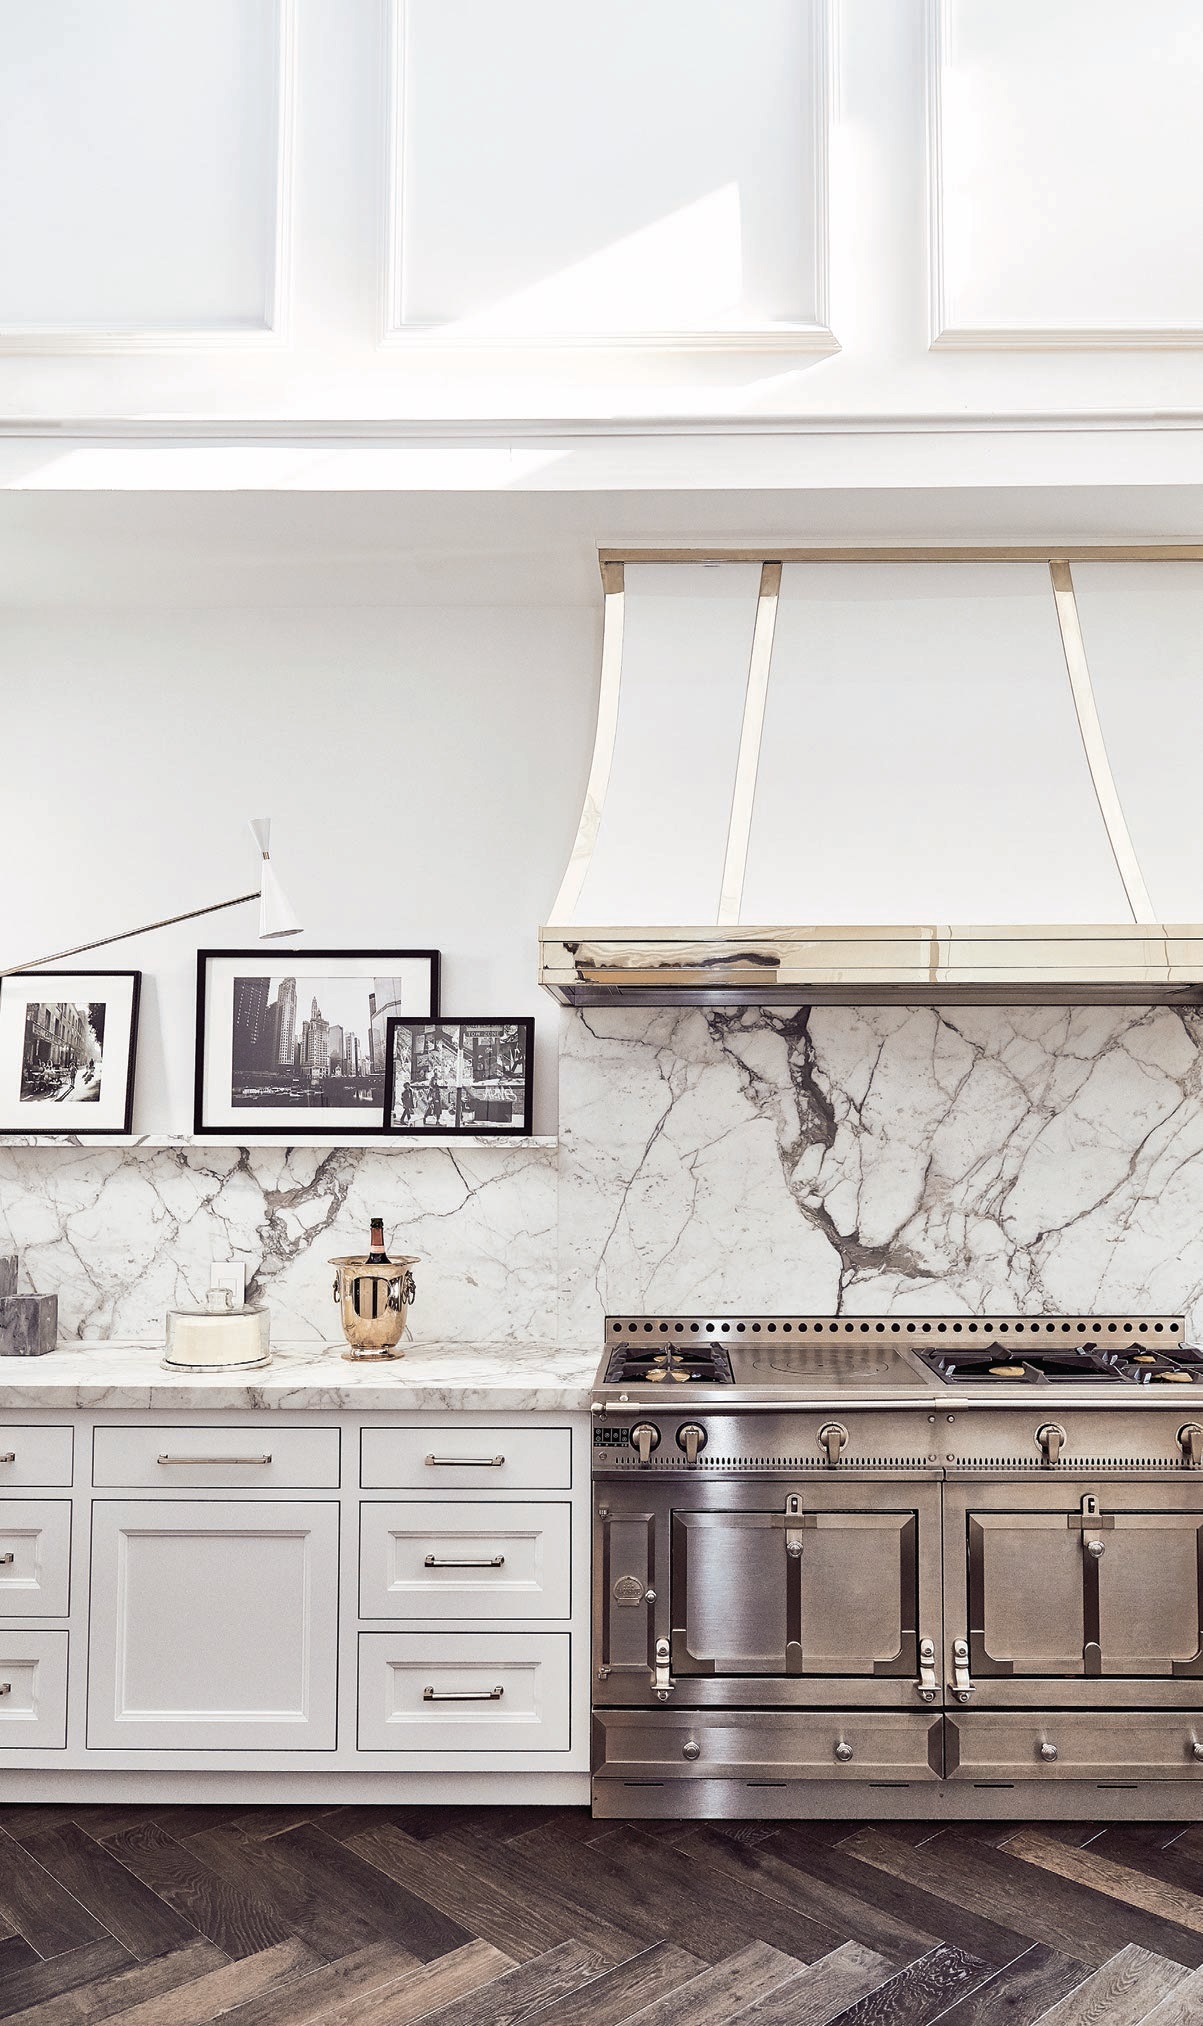 “The La Cornue Chateau stove and custom-painted hood really anchor the kitchen,” notes Wirth. PHOTOGRAPHED BY HEATHER TALBERT